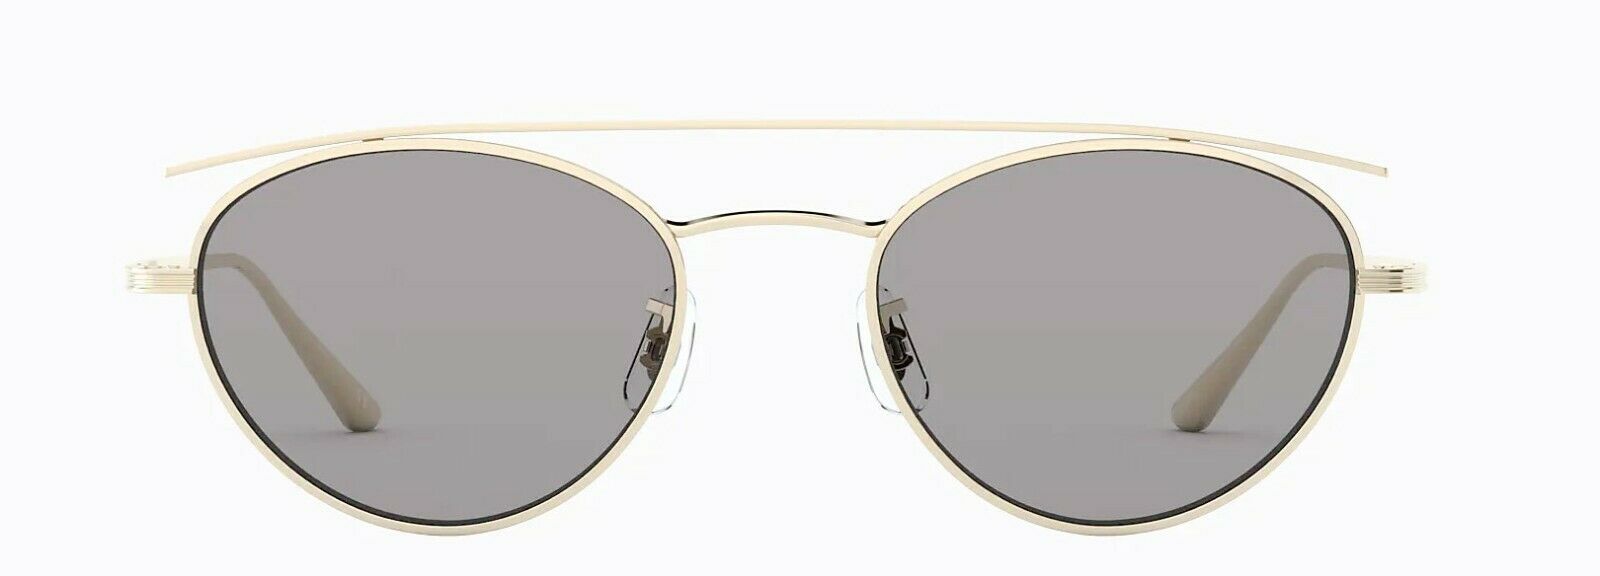 Oliver Peoples Sunglasses 1258ST 5292R5 The Row Hightree White Gold / Grey 49mm-827934432598-classypw.com-2